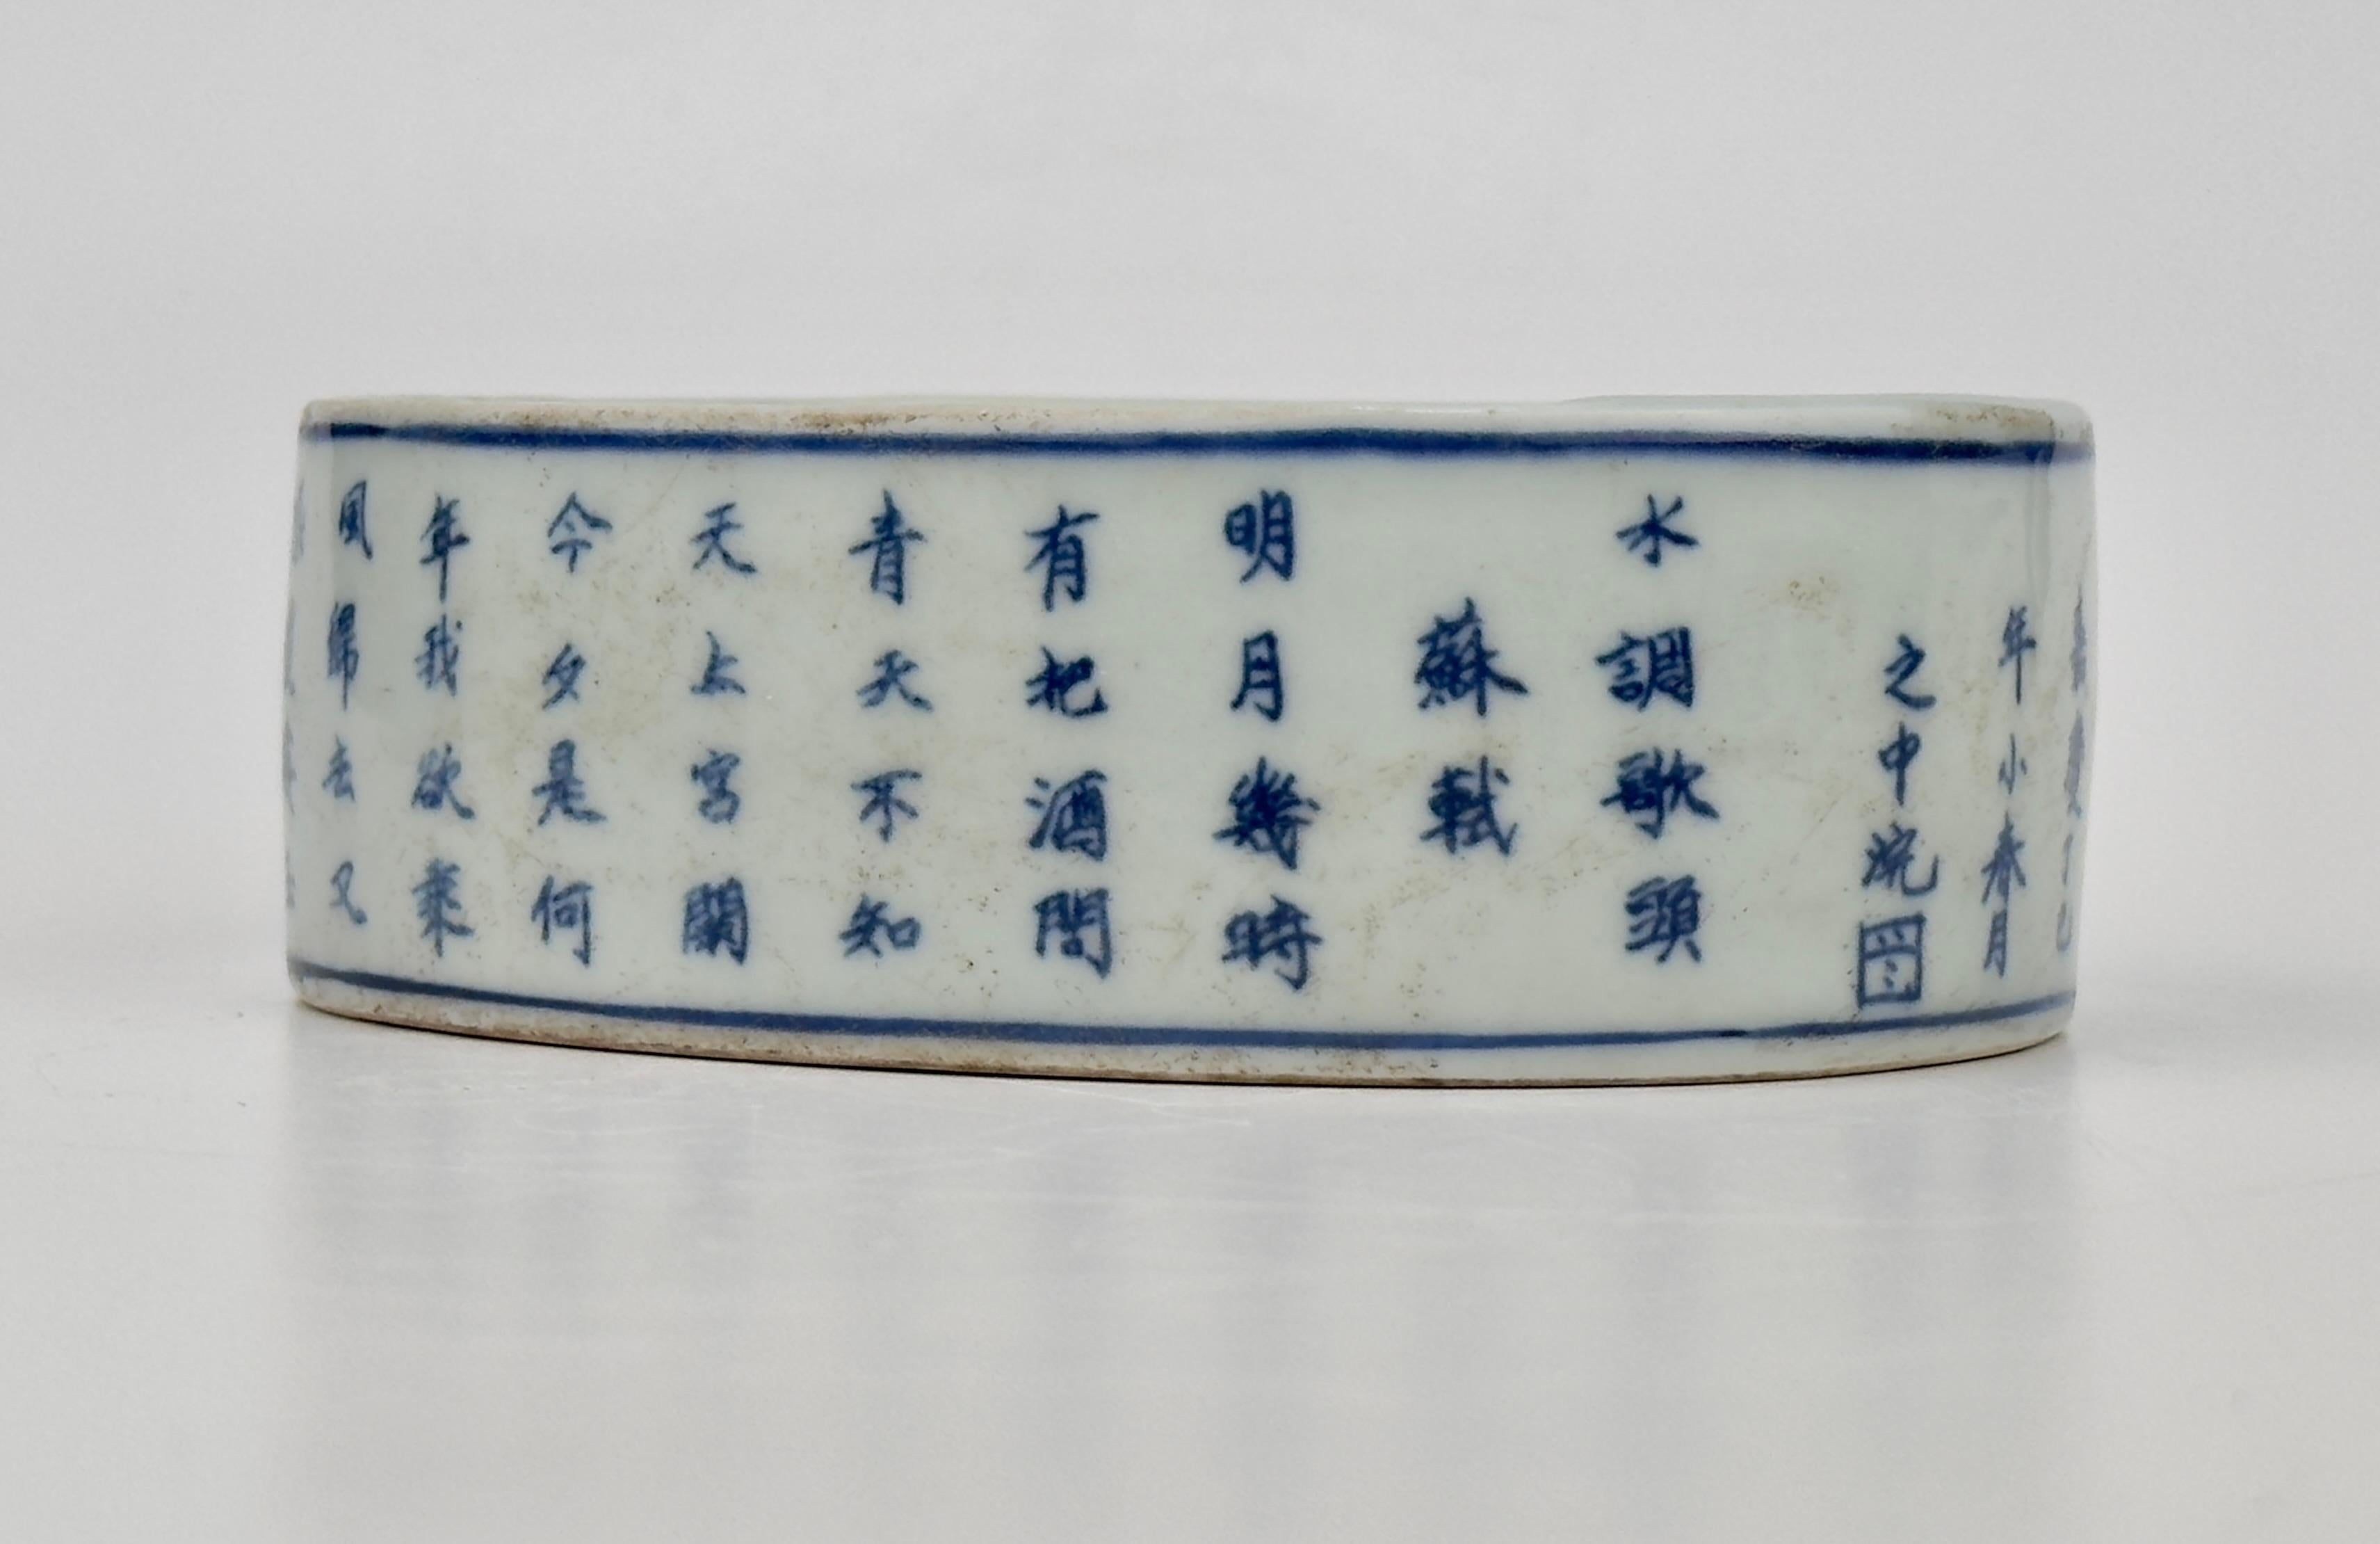 In the late Qing Dynasty, it was popular to incorporate calligraphy and poetry into ceramics. The piece has a flat, oval shape and was likely used as an inkstone, one of the essential tools in a scholar's studio. The integration of written works